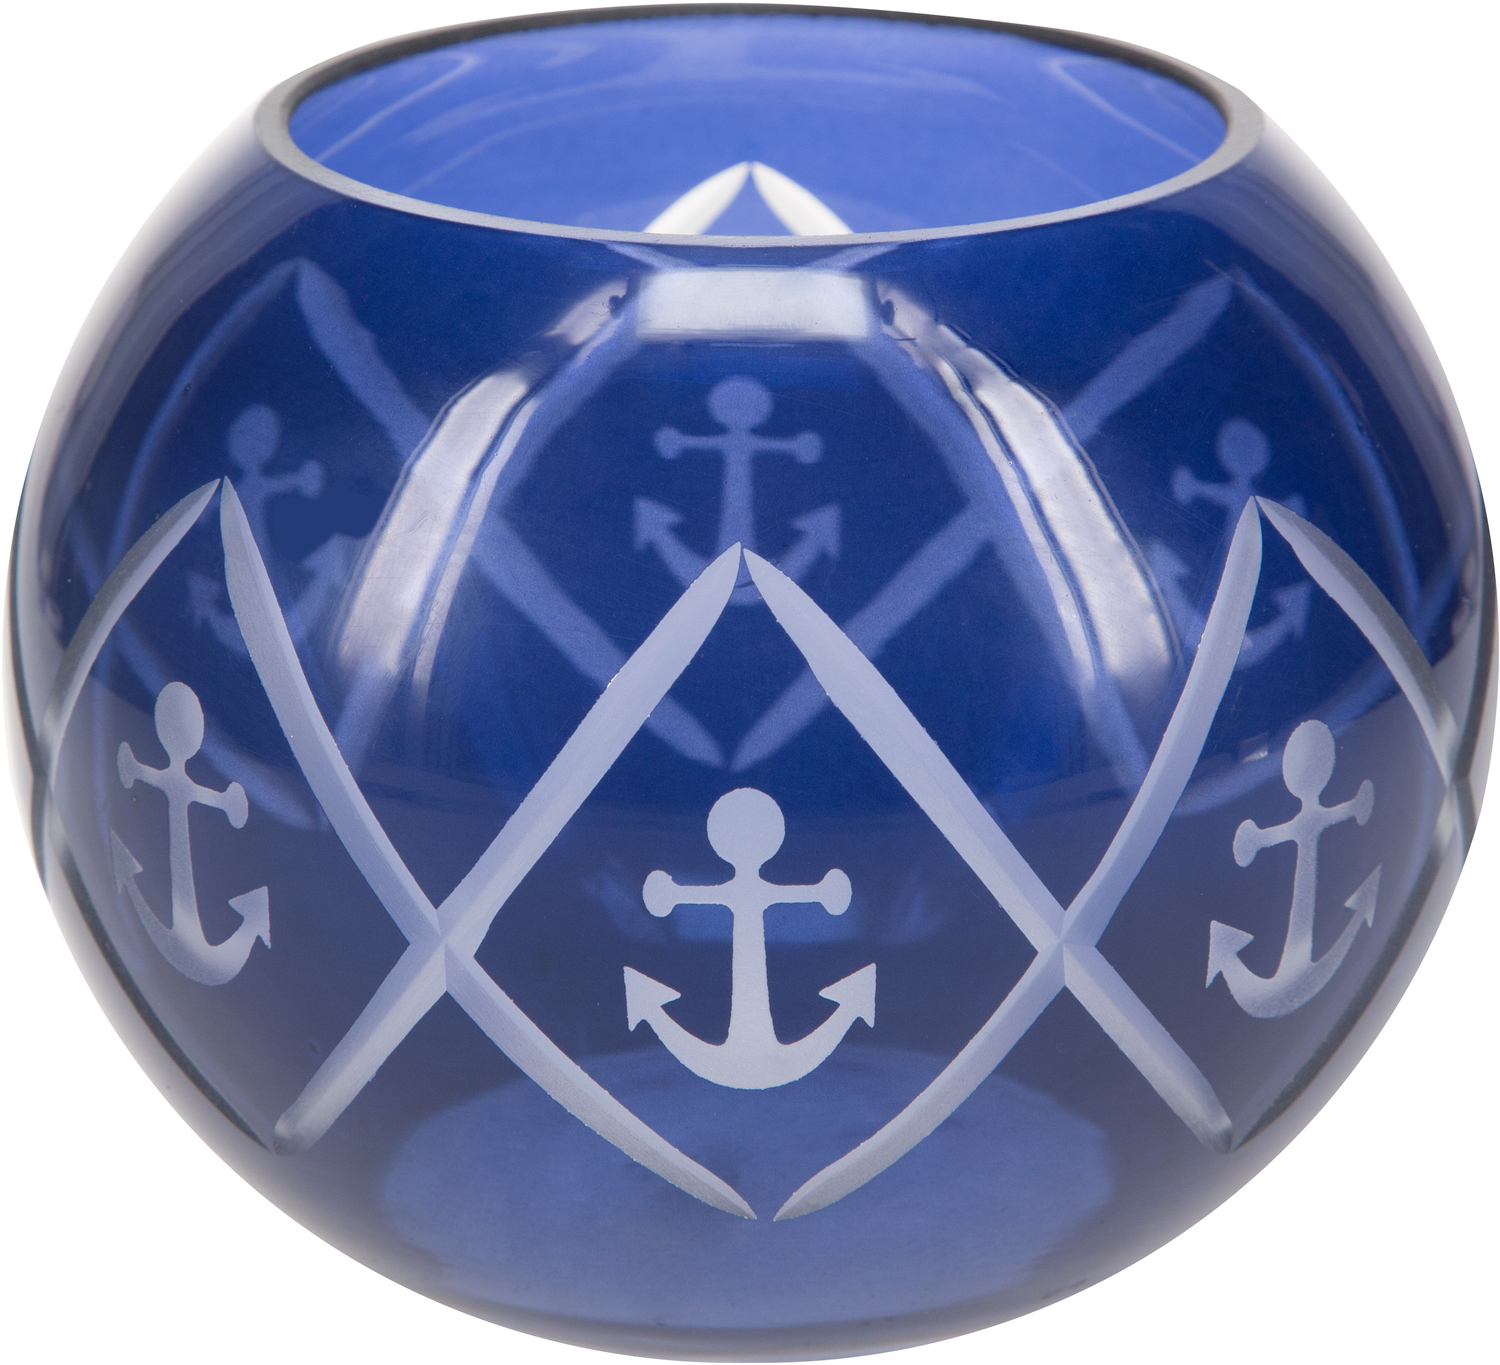 Blue Anchor by Candle Decor - Blue Anchor - 5" Round Votive Holder